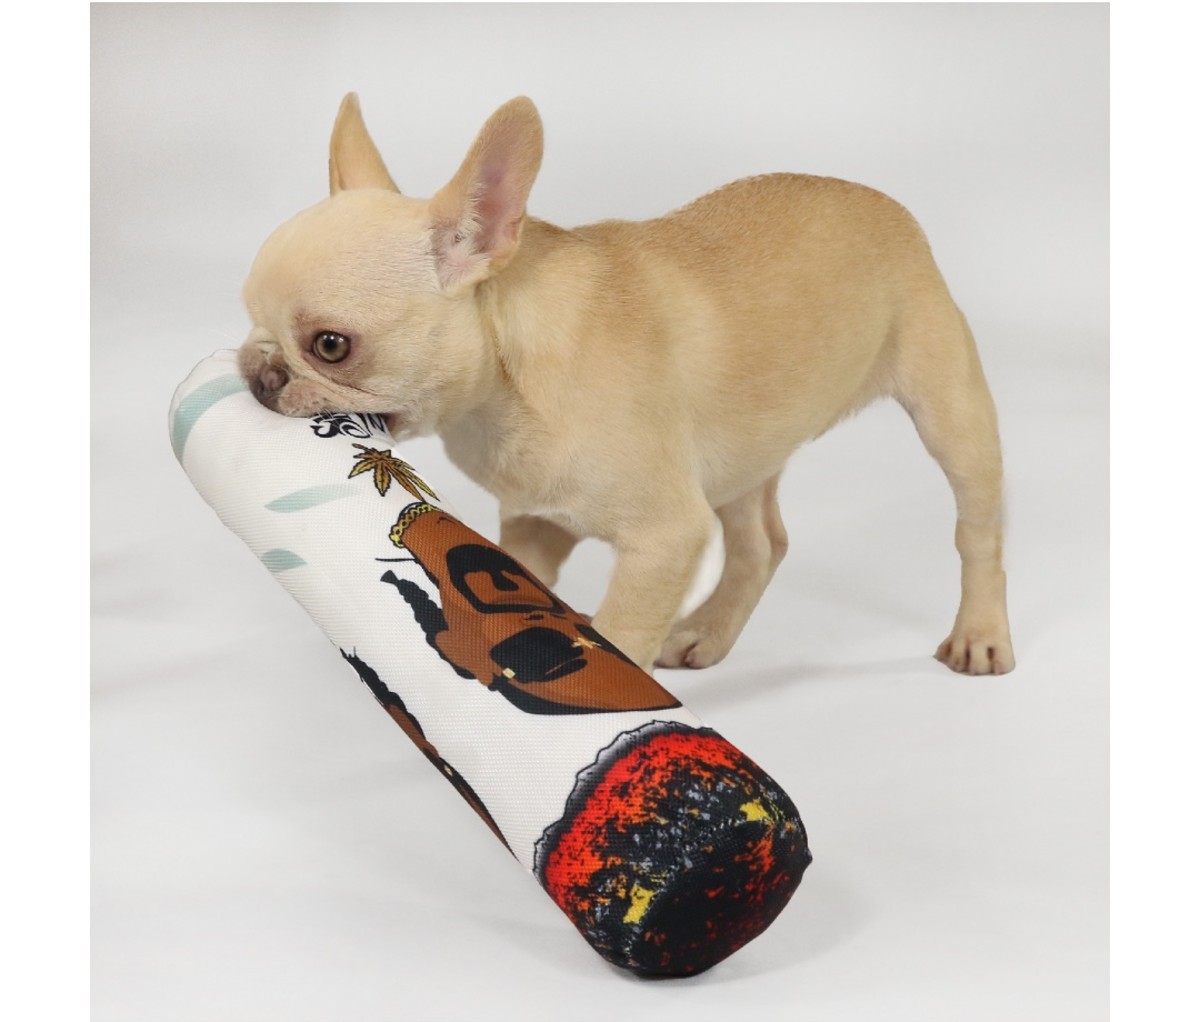 Small dog holding a large joint plushie on an off-white background.